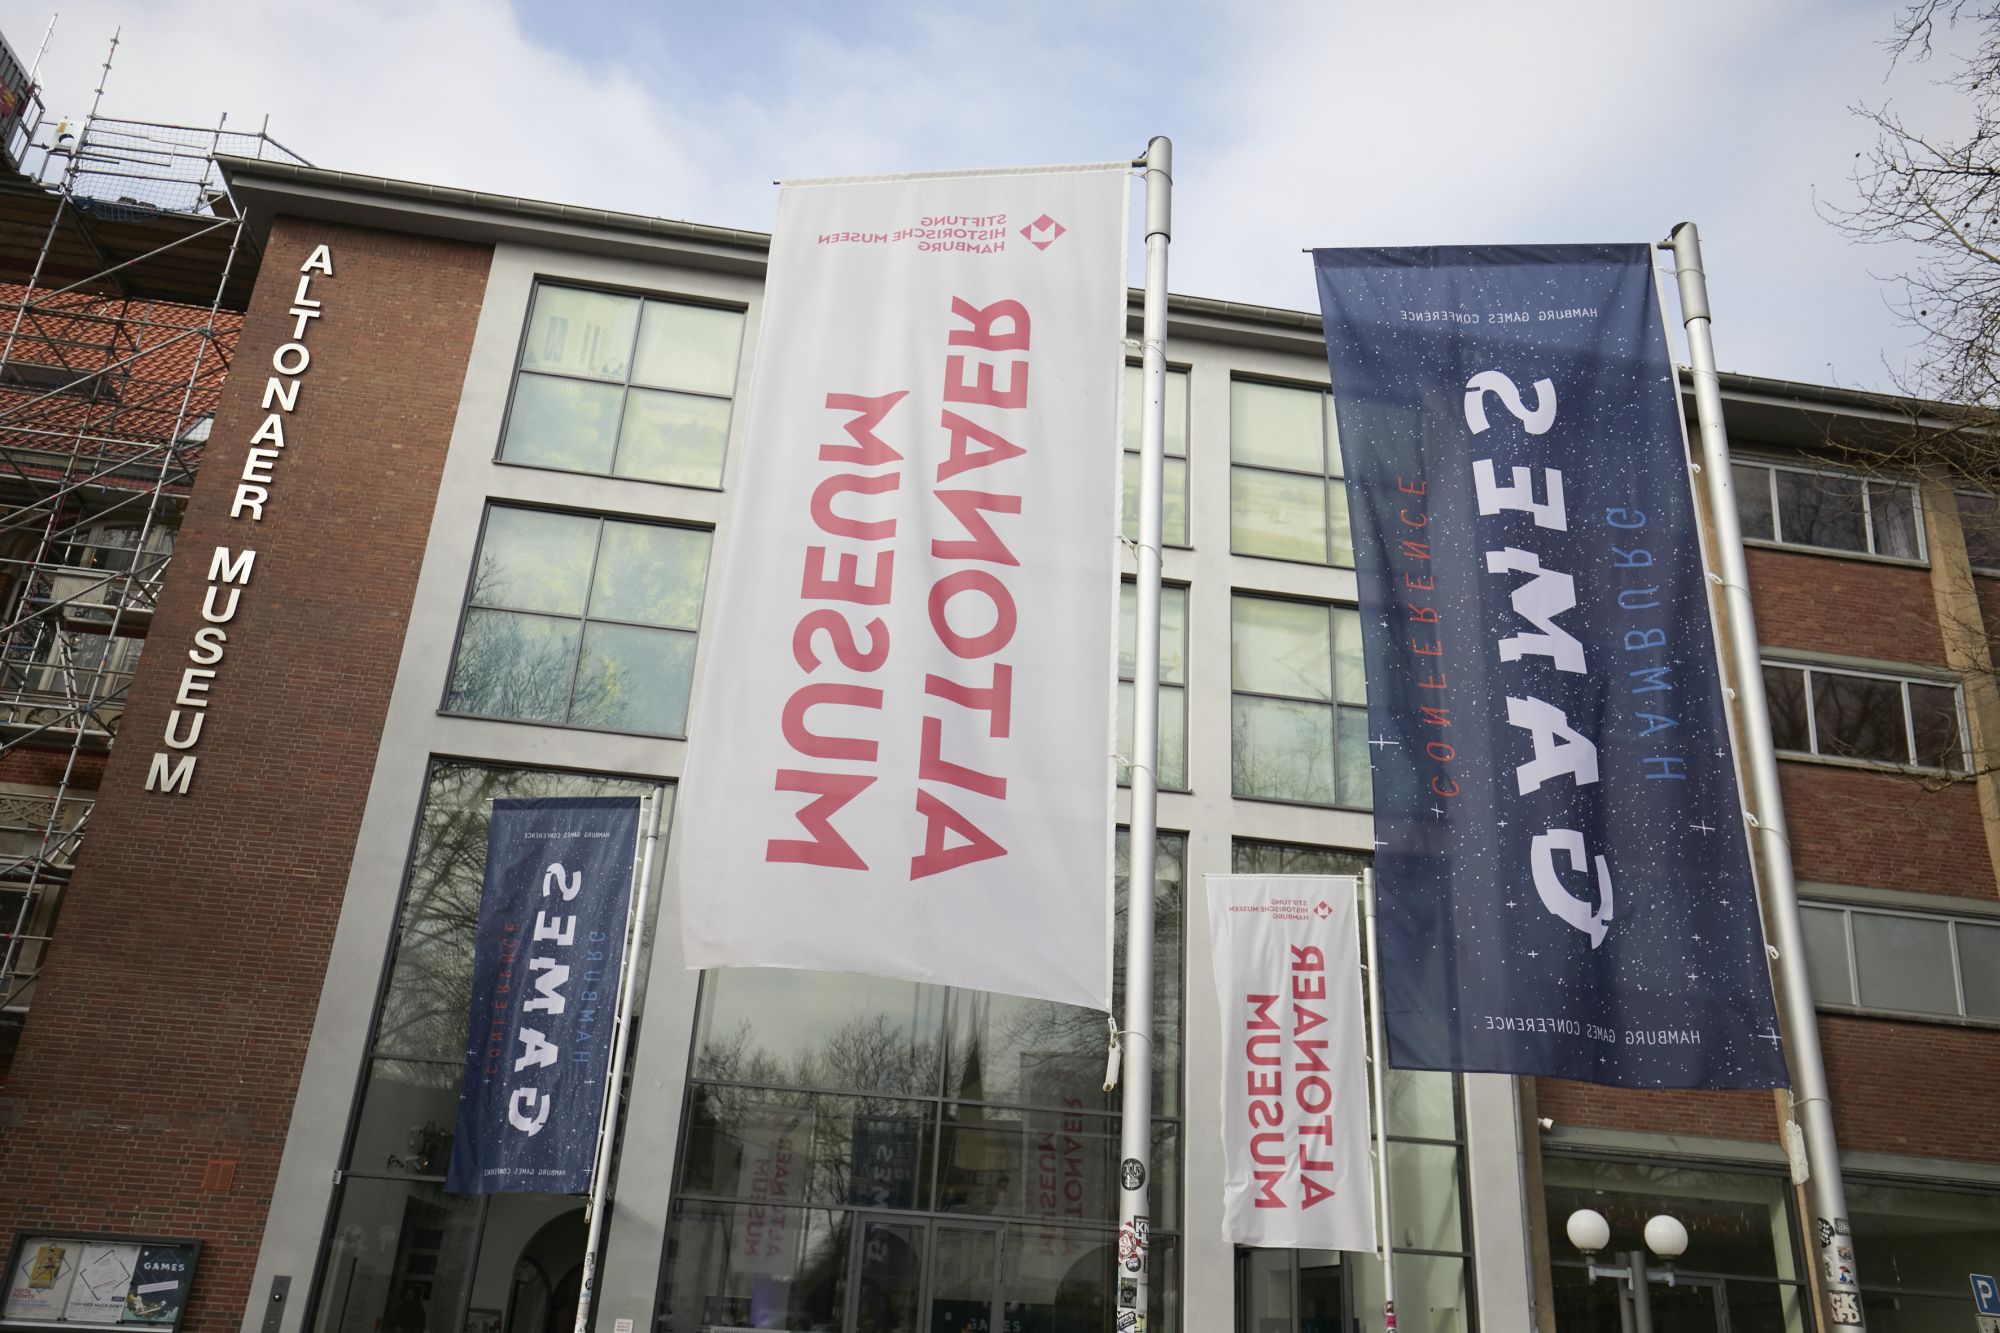 Entrance to the Hamburg Games Conference 2023 in the Altonaer Museum | Photo by Rolf Otzipka